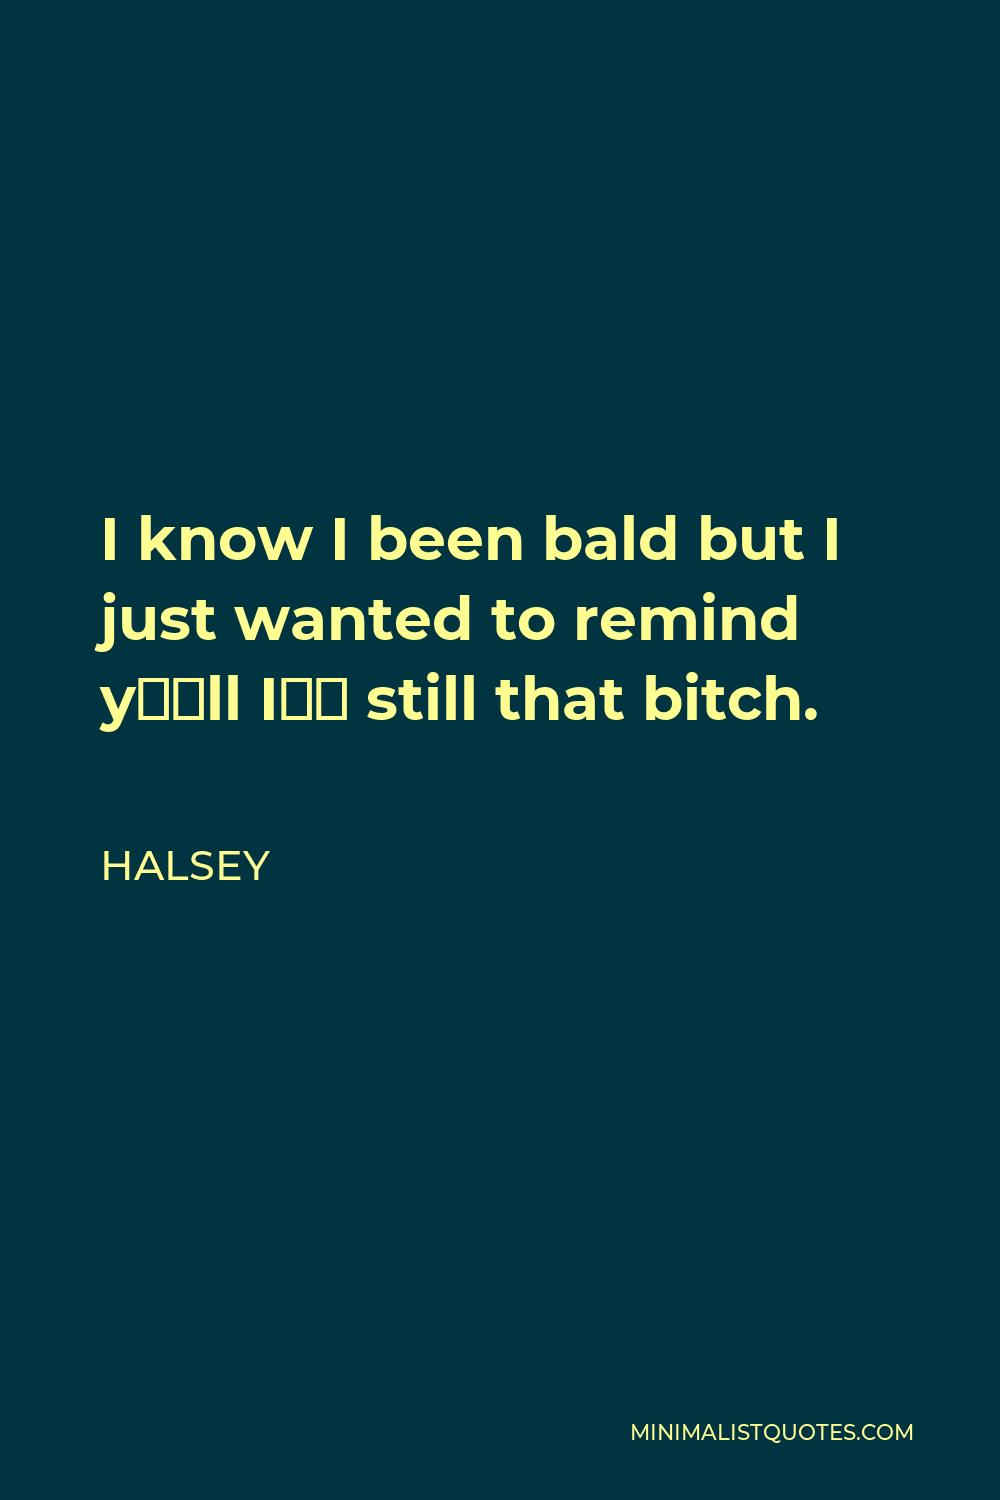 Halsey Quote - I know I been bald but I just wanted to remind y’all I’m still that bitch.